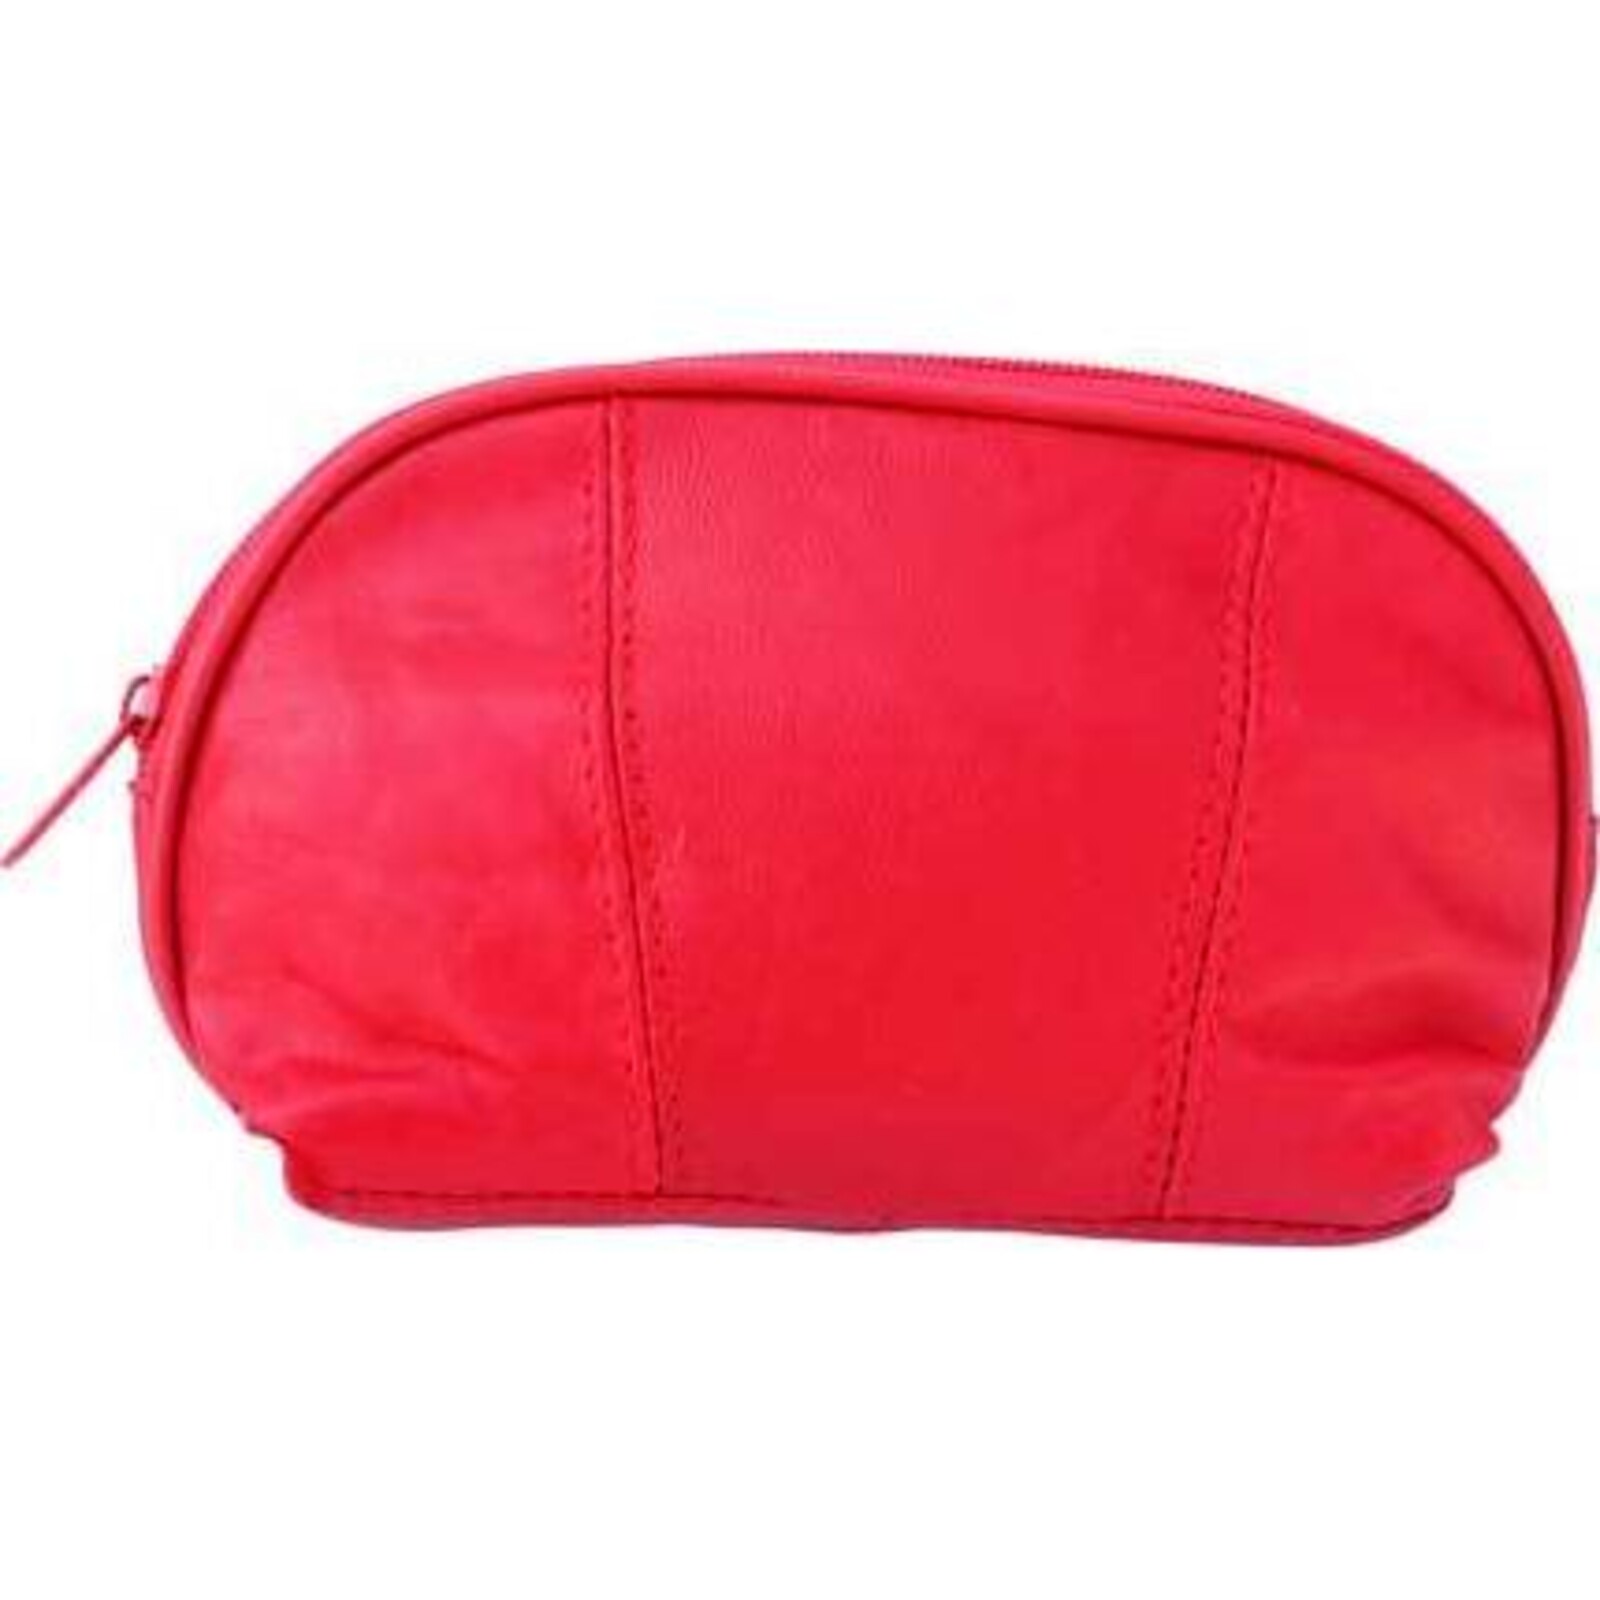 Leather Pouch Purse - Red